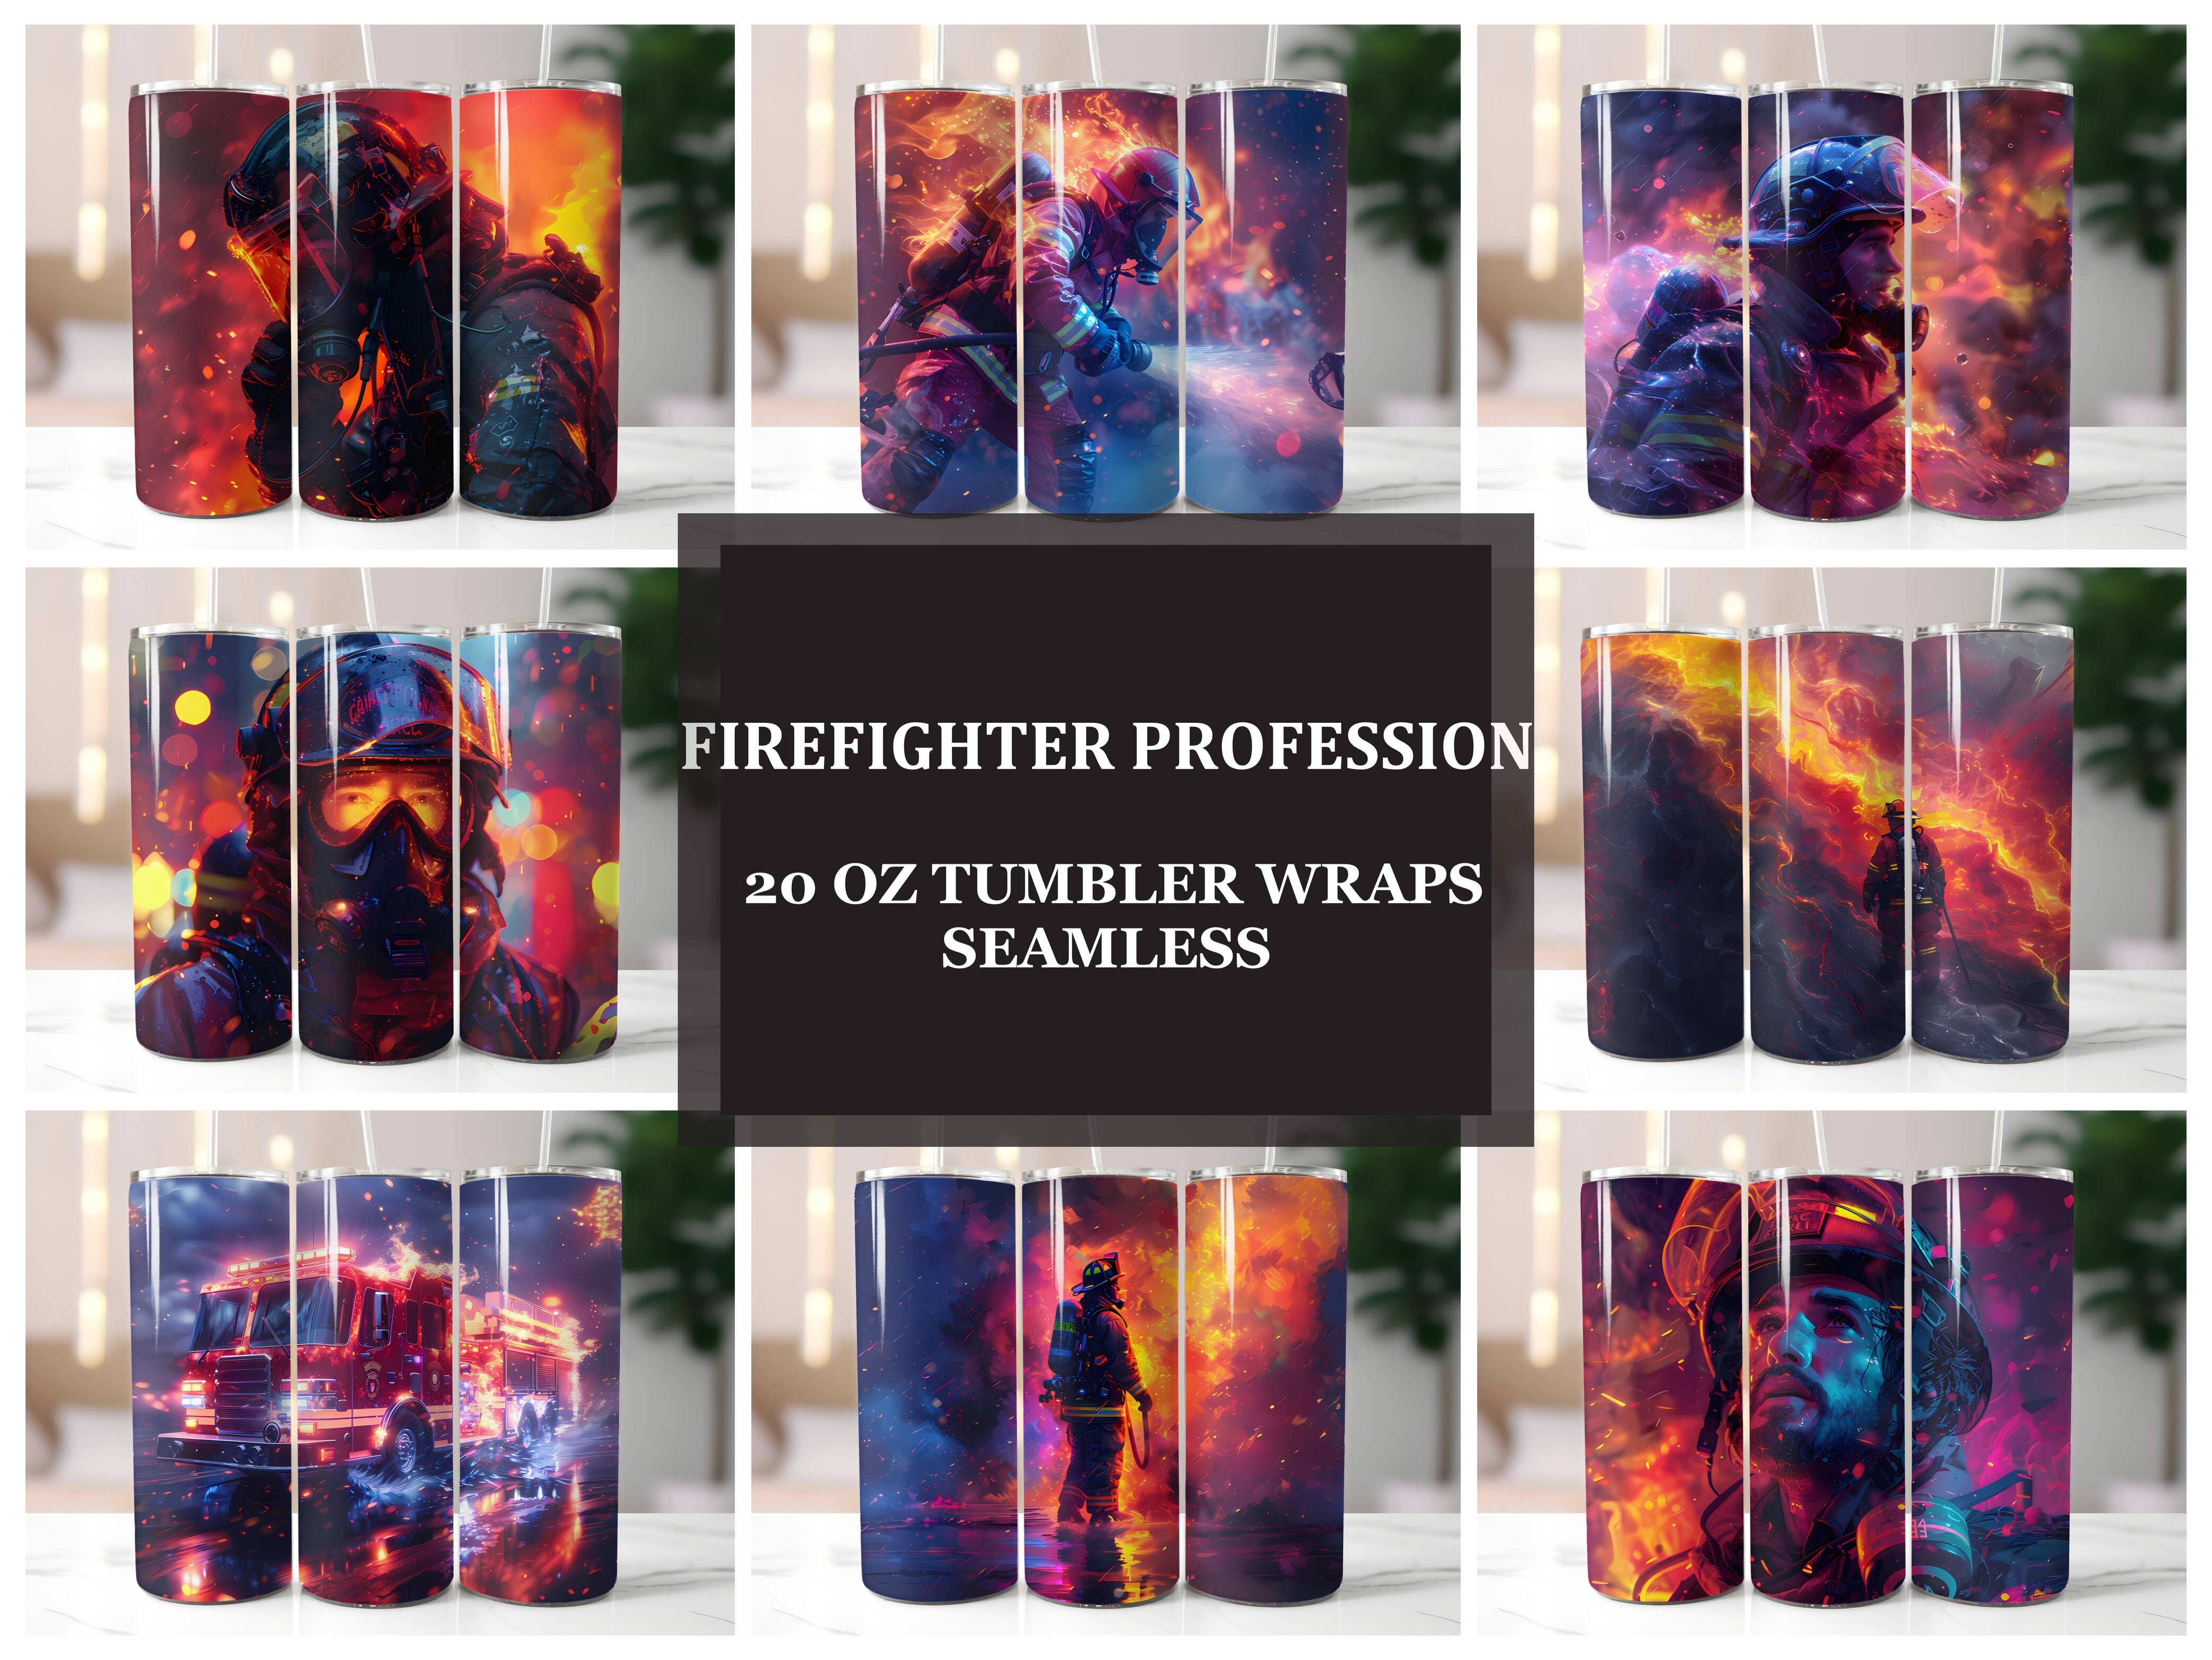 Firefighter Profession 5 Tumbler Wrap